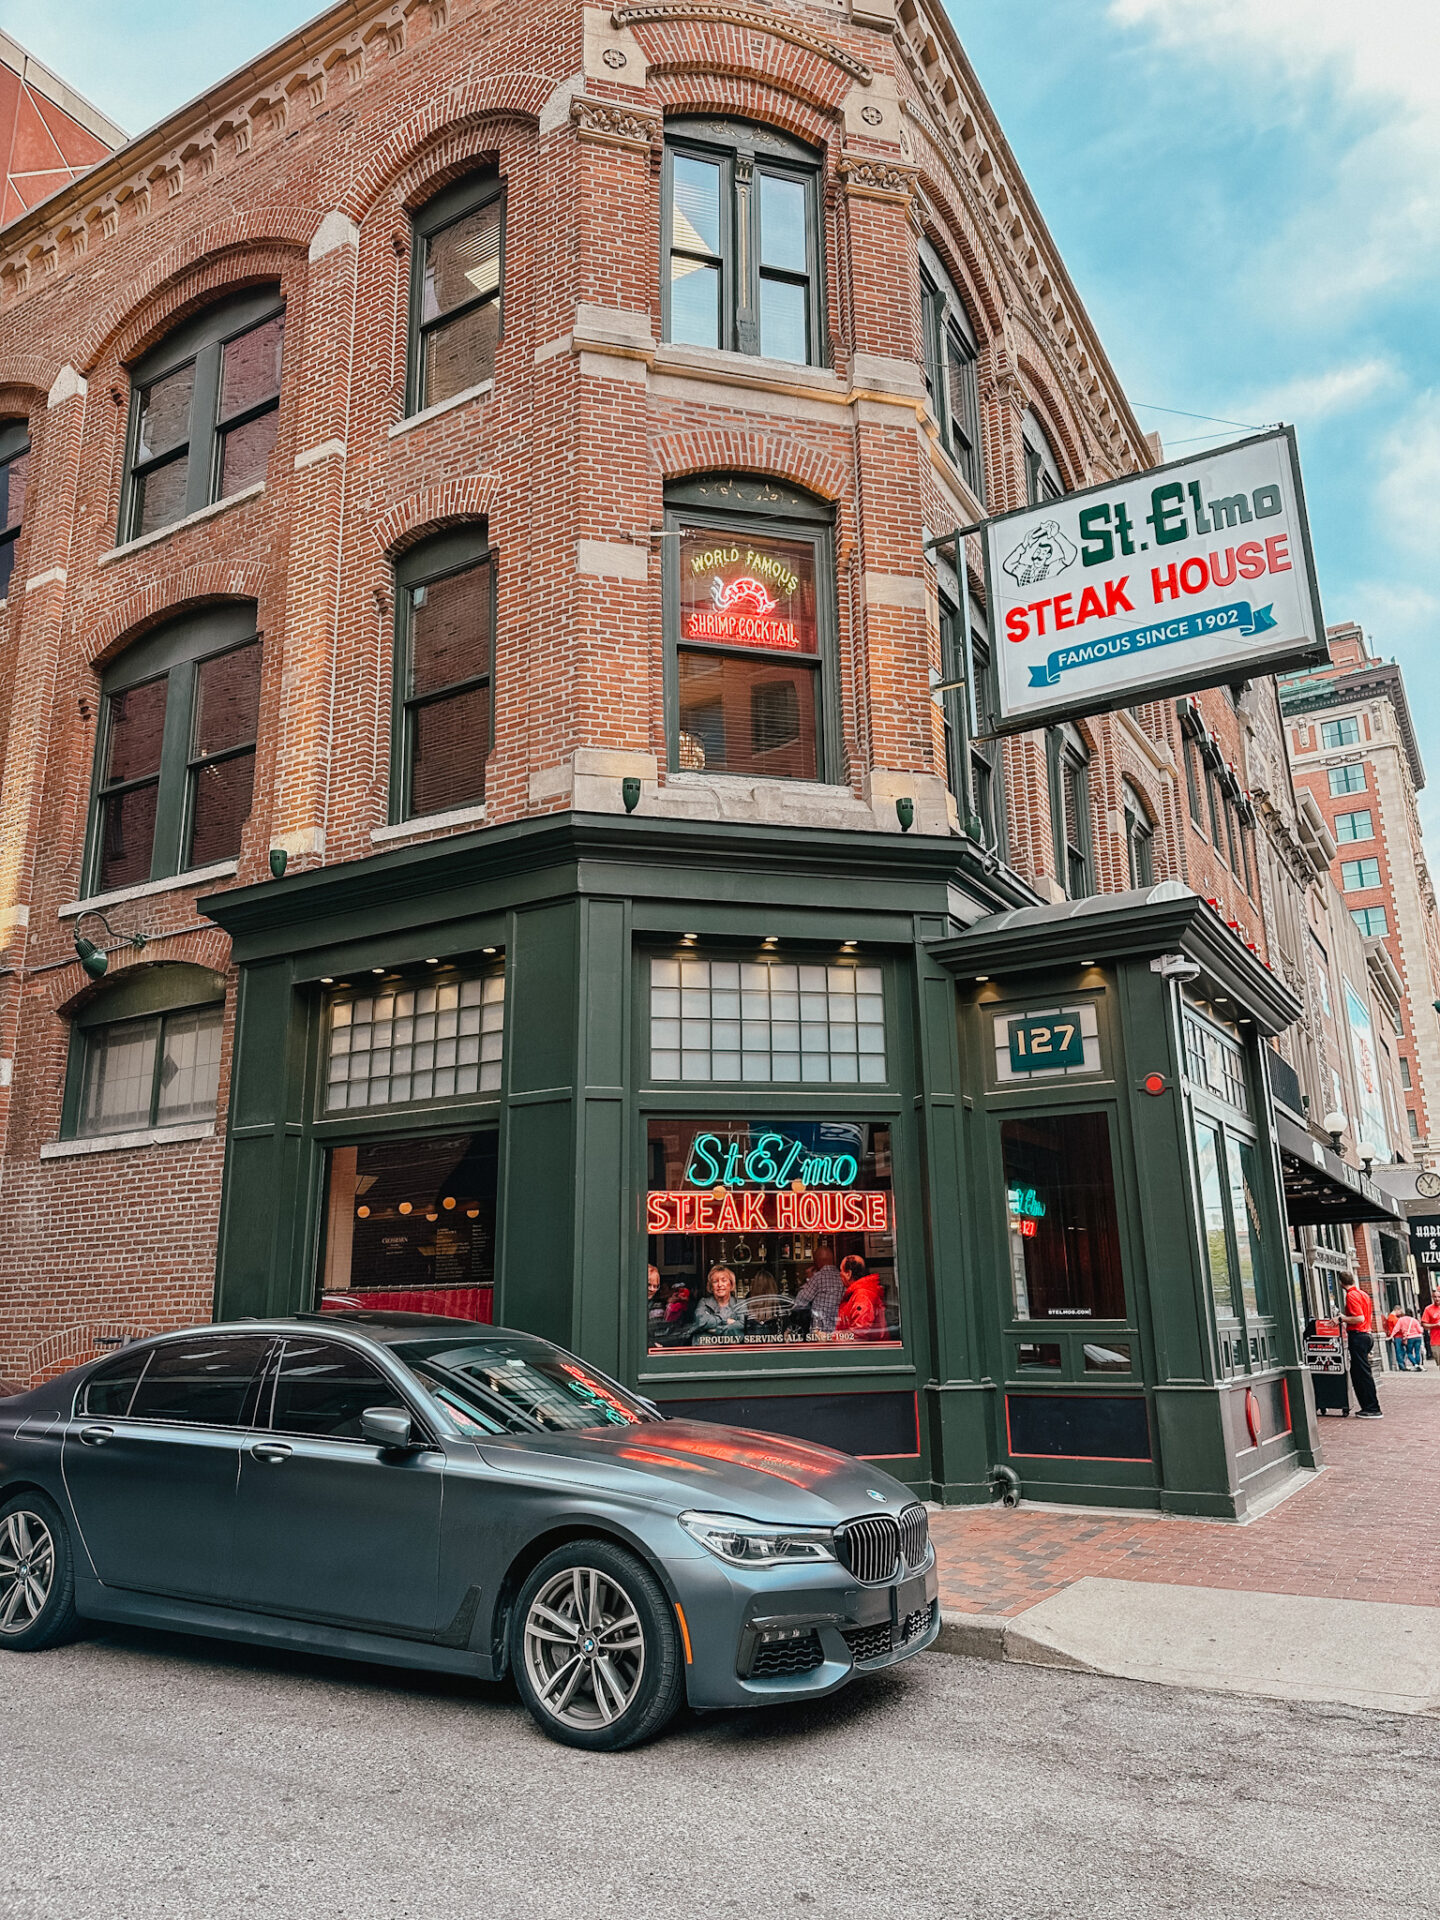 St. Elmo Steak House historical restaurant in downtown Indianapolis, IN by travel blogger Angela Lanter